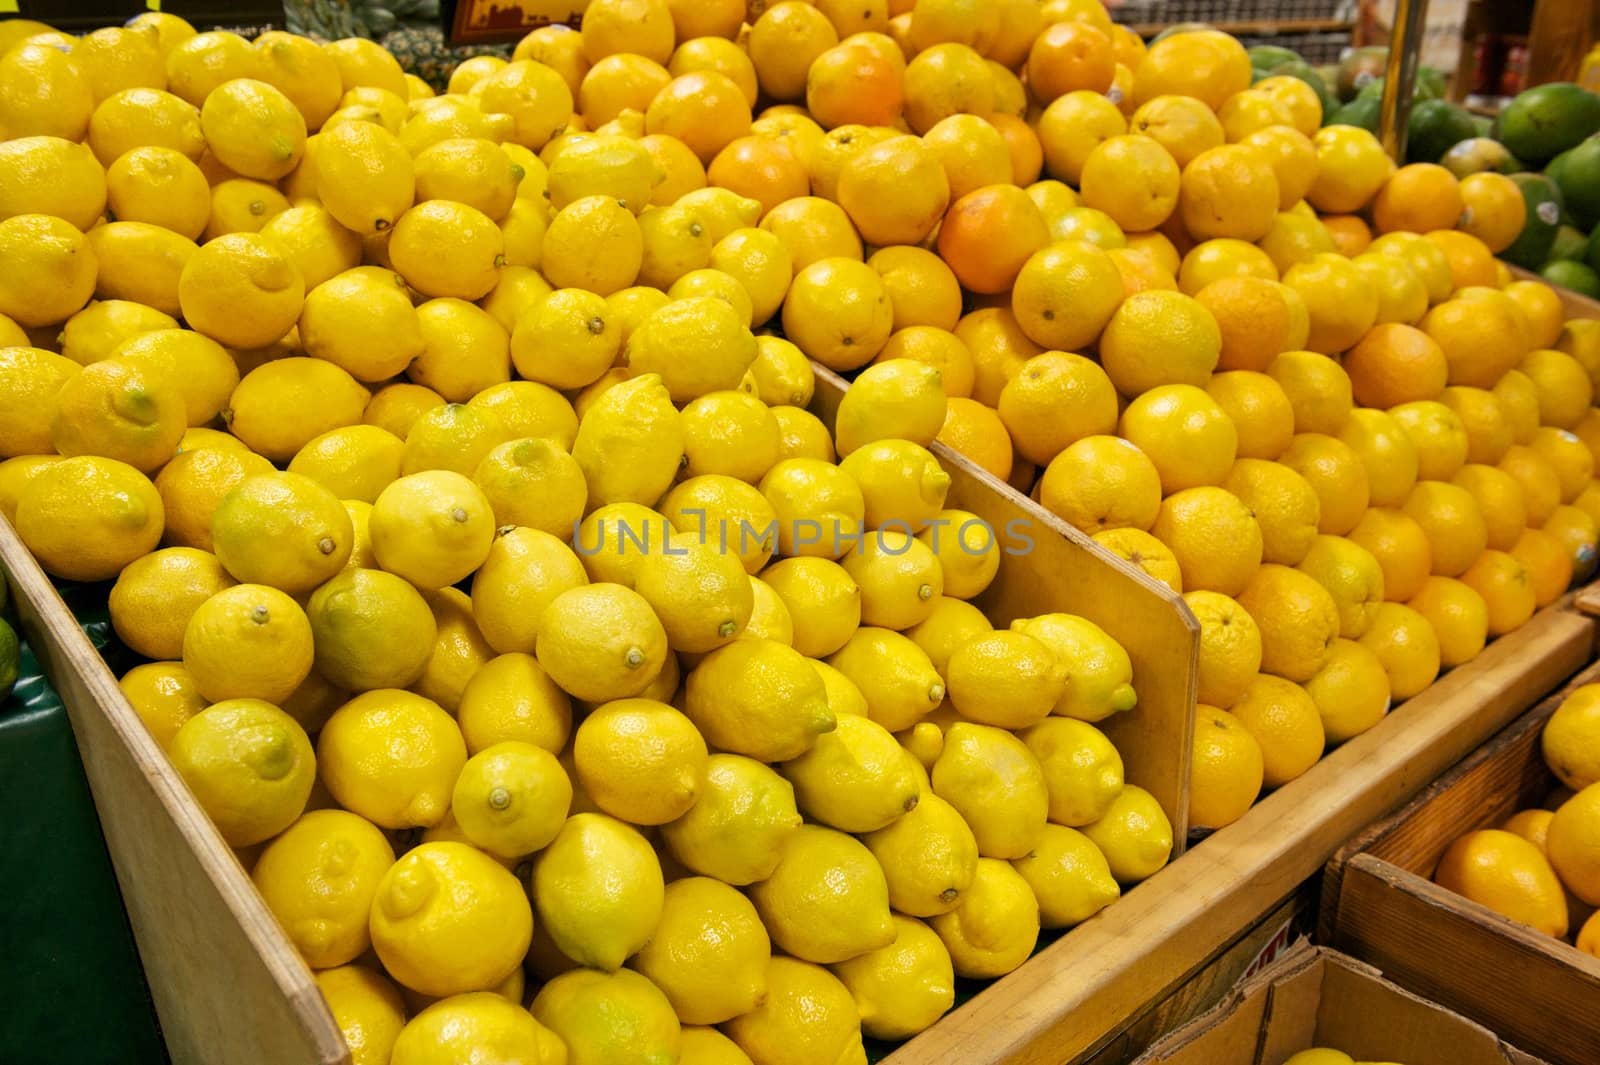 Wooden Bins Filled with Fresh Lemons and Oranges by pixelsnap